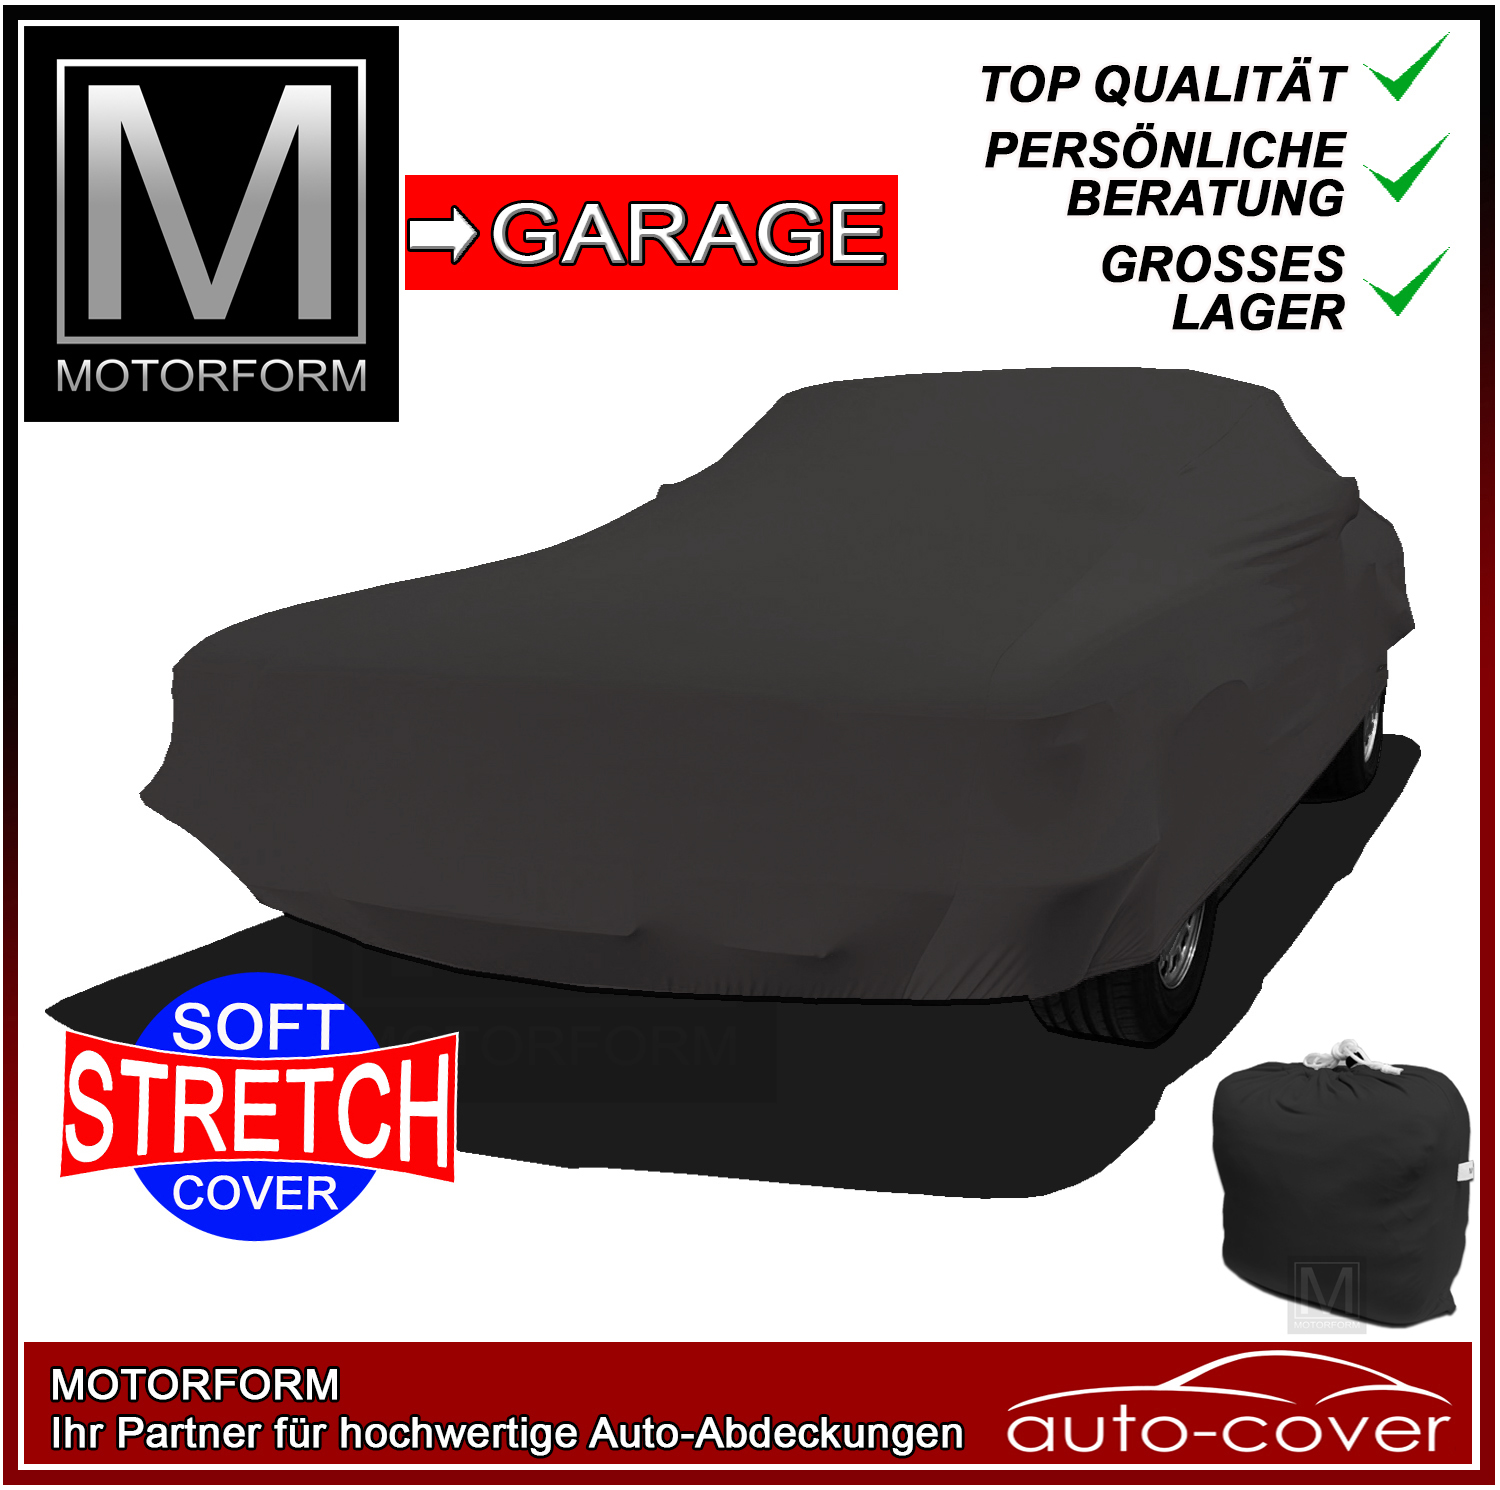 Super Stretchy Cover for Mercedes SL-Class R129 (1989-2001)